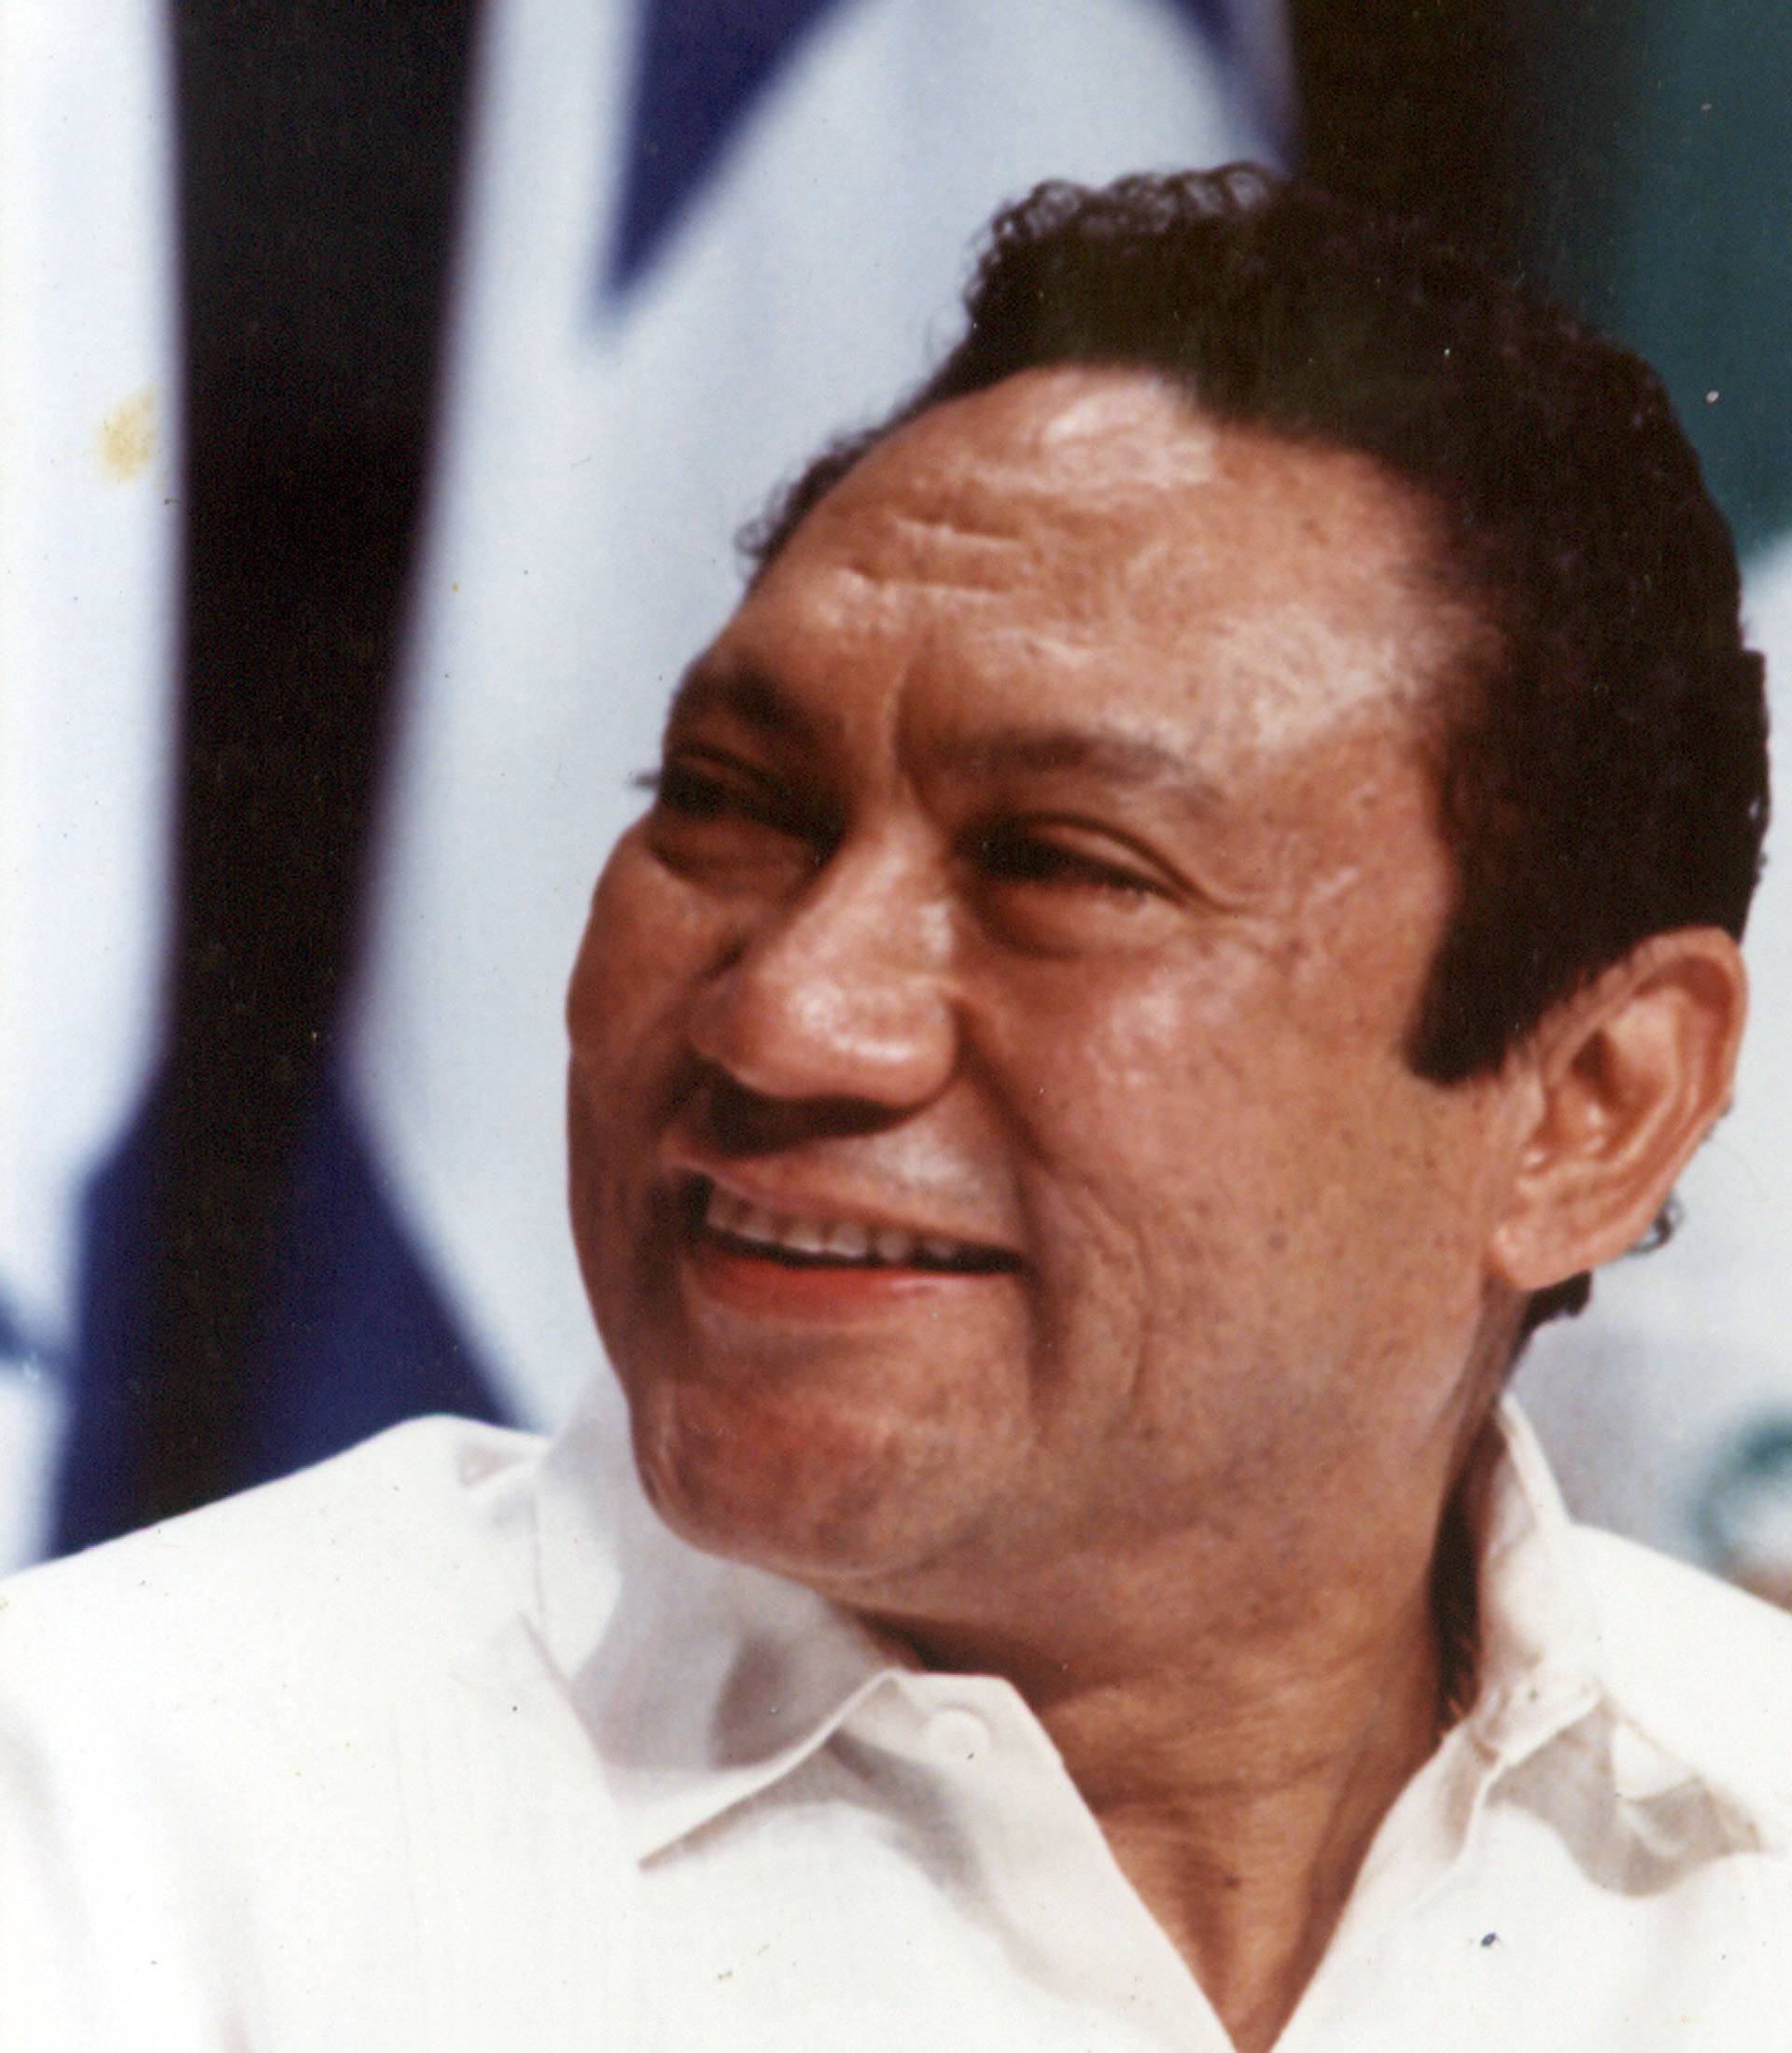 FILE PHOTO: Panamanian strongman Manuel Antonio Noriega takes part in a conference at the Atlapa center in this file photo in Panama City